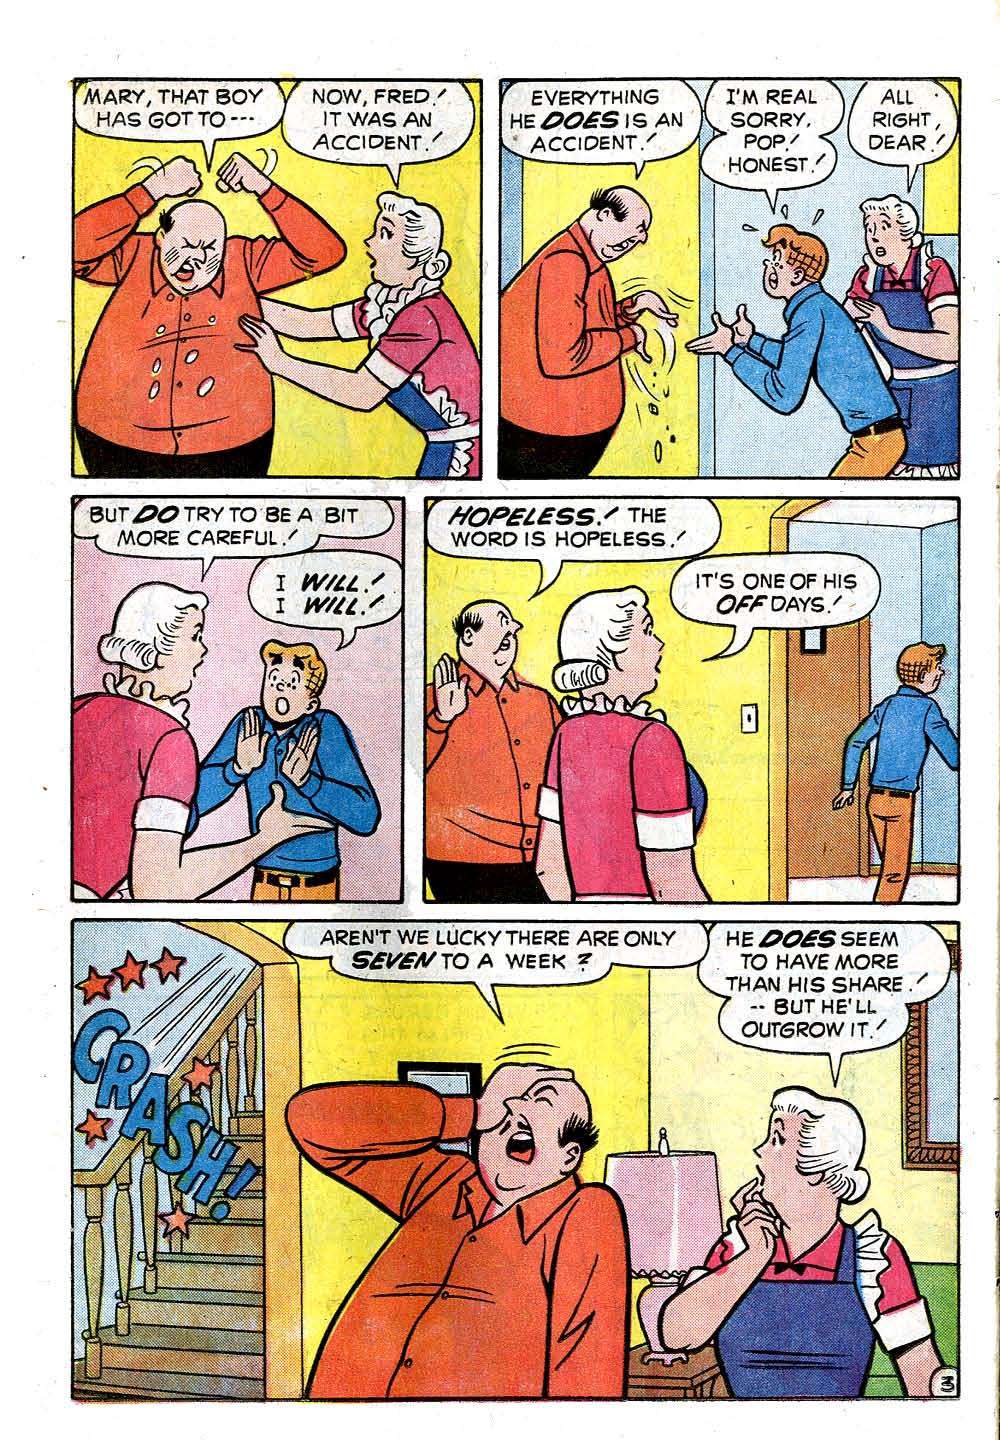 Archie (1960) 233 Page 22